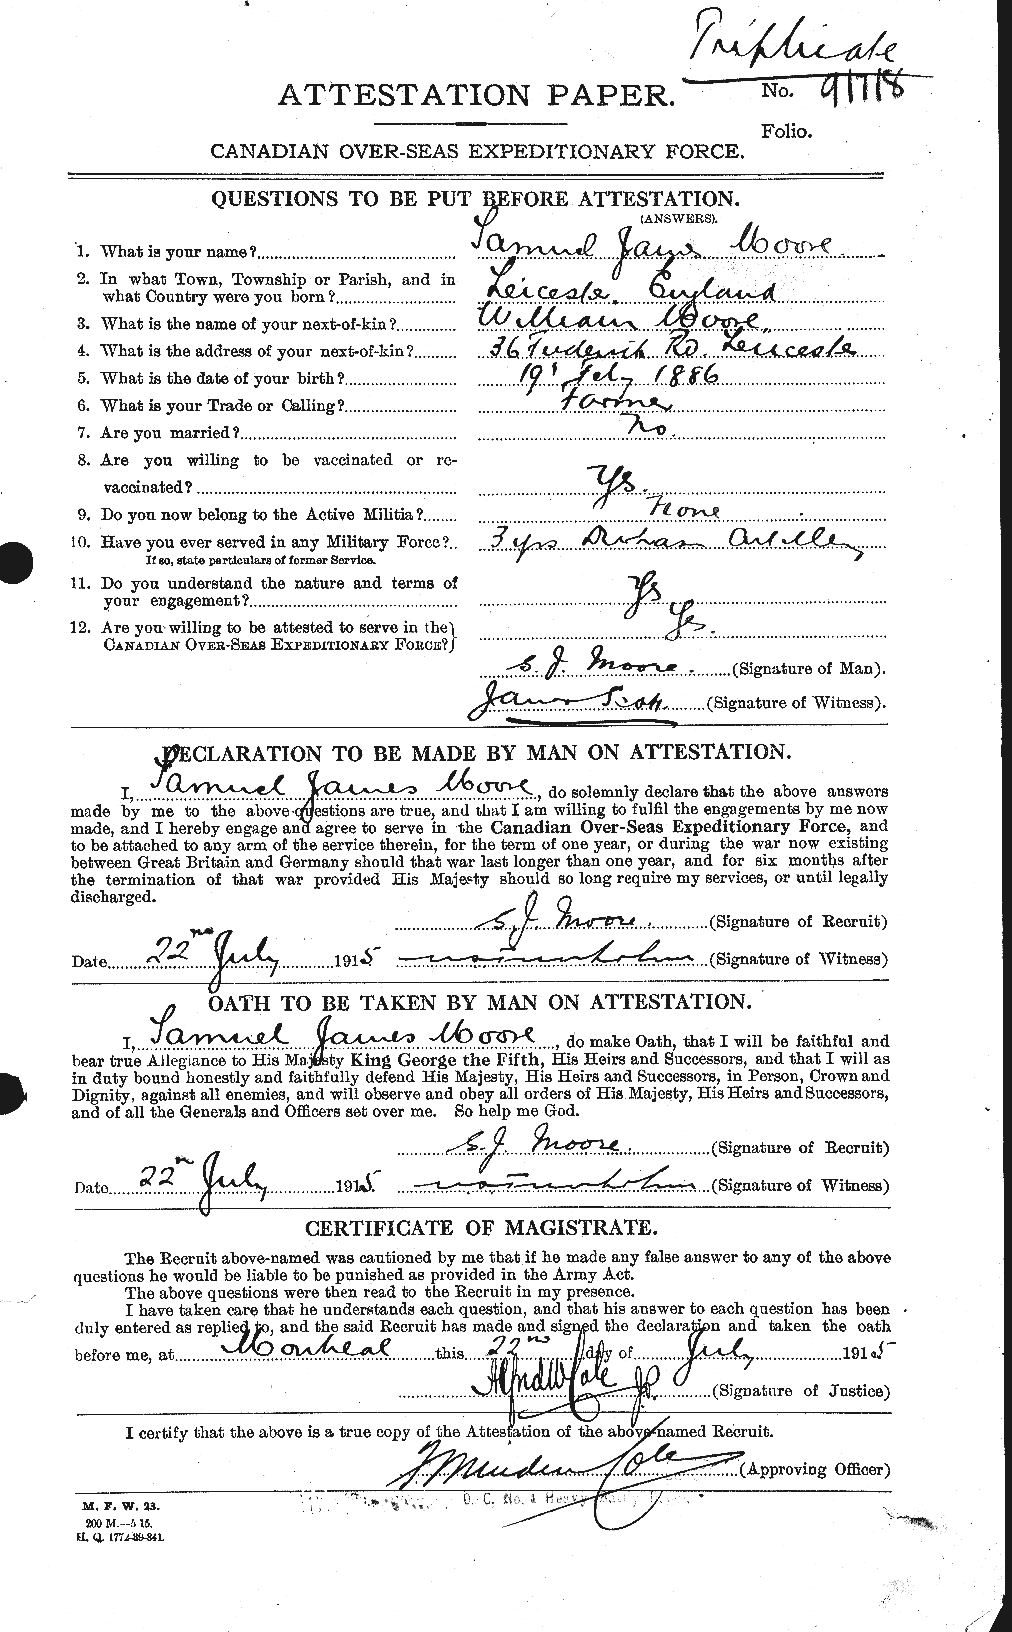 Personnel Records of the First World War - CEF 505568a